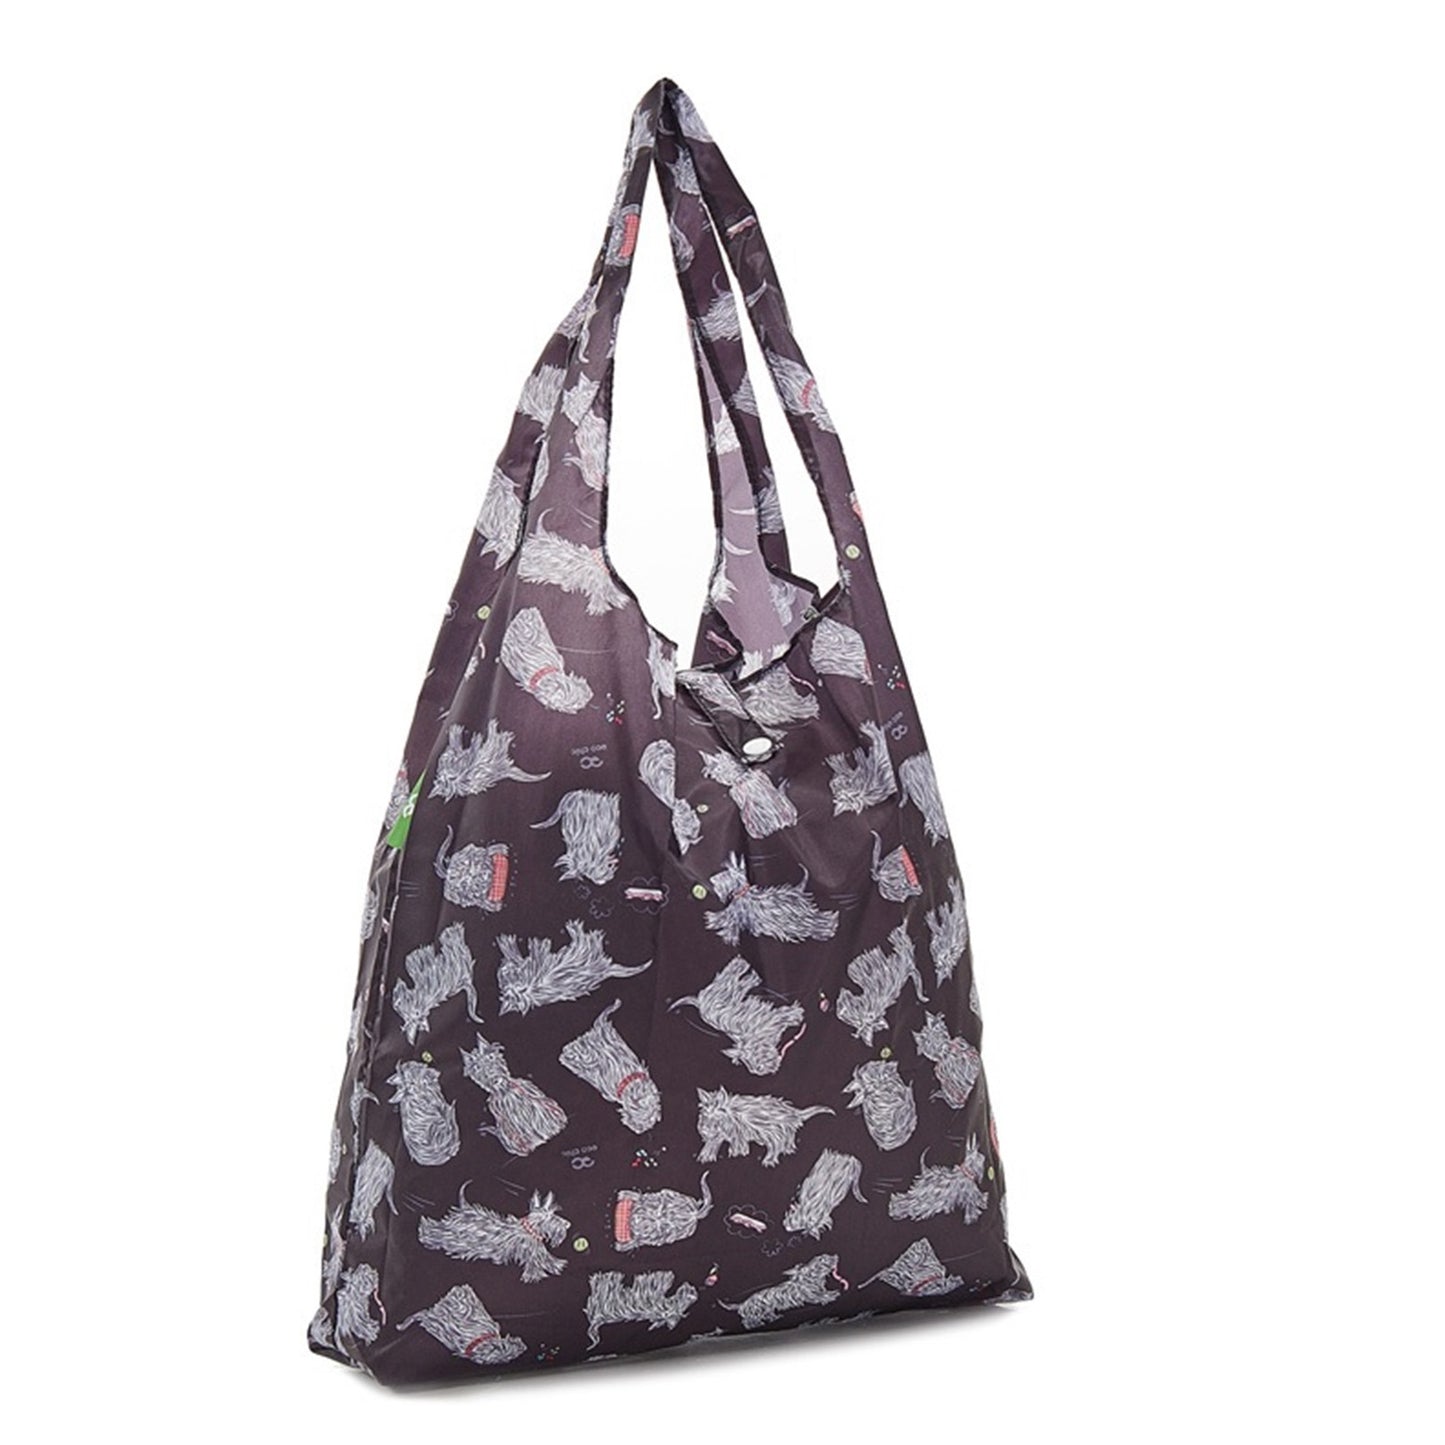 New 2020 Eco Chic 100% Recycled Foldable Scotty Dog Print Reusable Shopper Bag